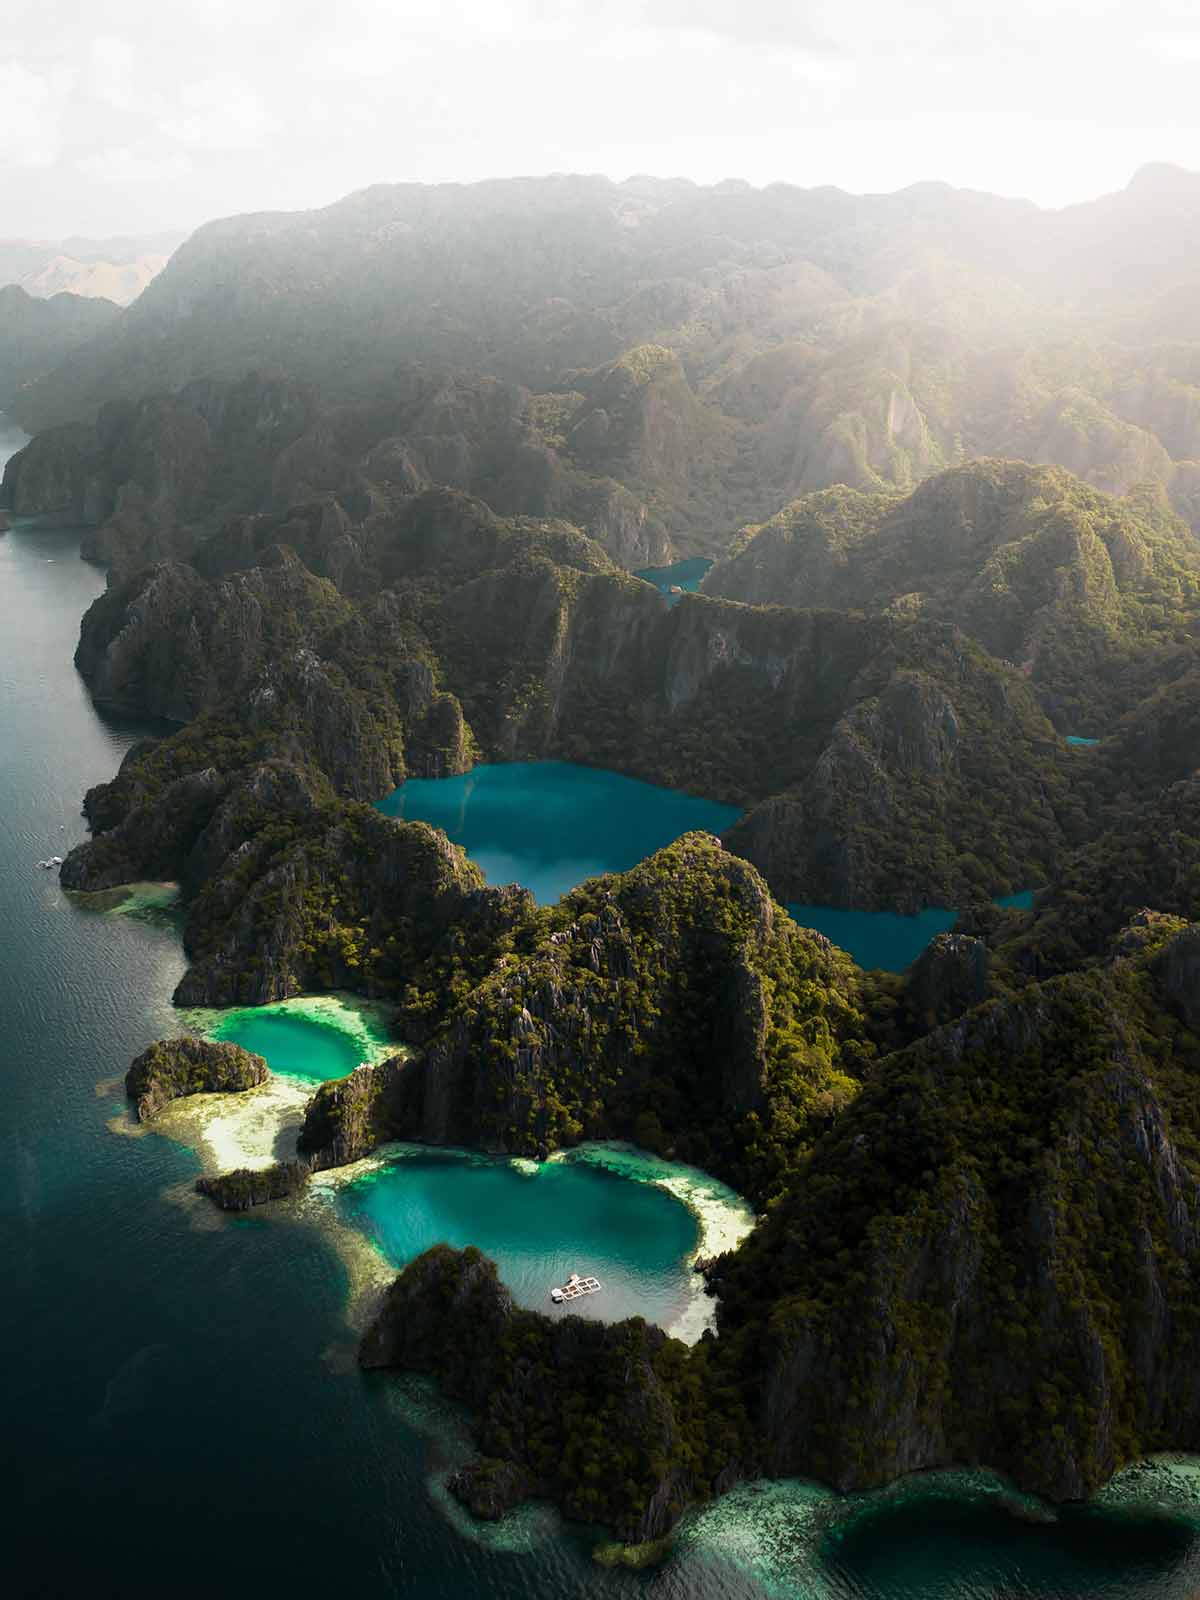 Due to its archipelago structure, Philippines is filled with beautiful beaches and lakes such as the Barracuda Lake in Coron, Palawan, Philippines